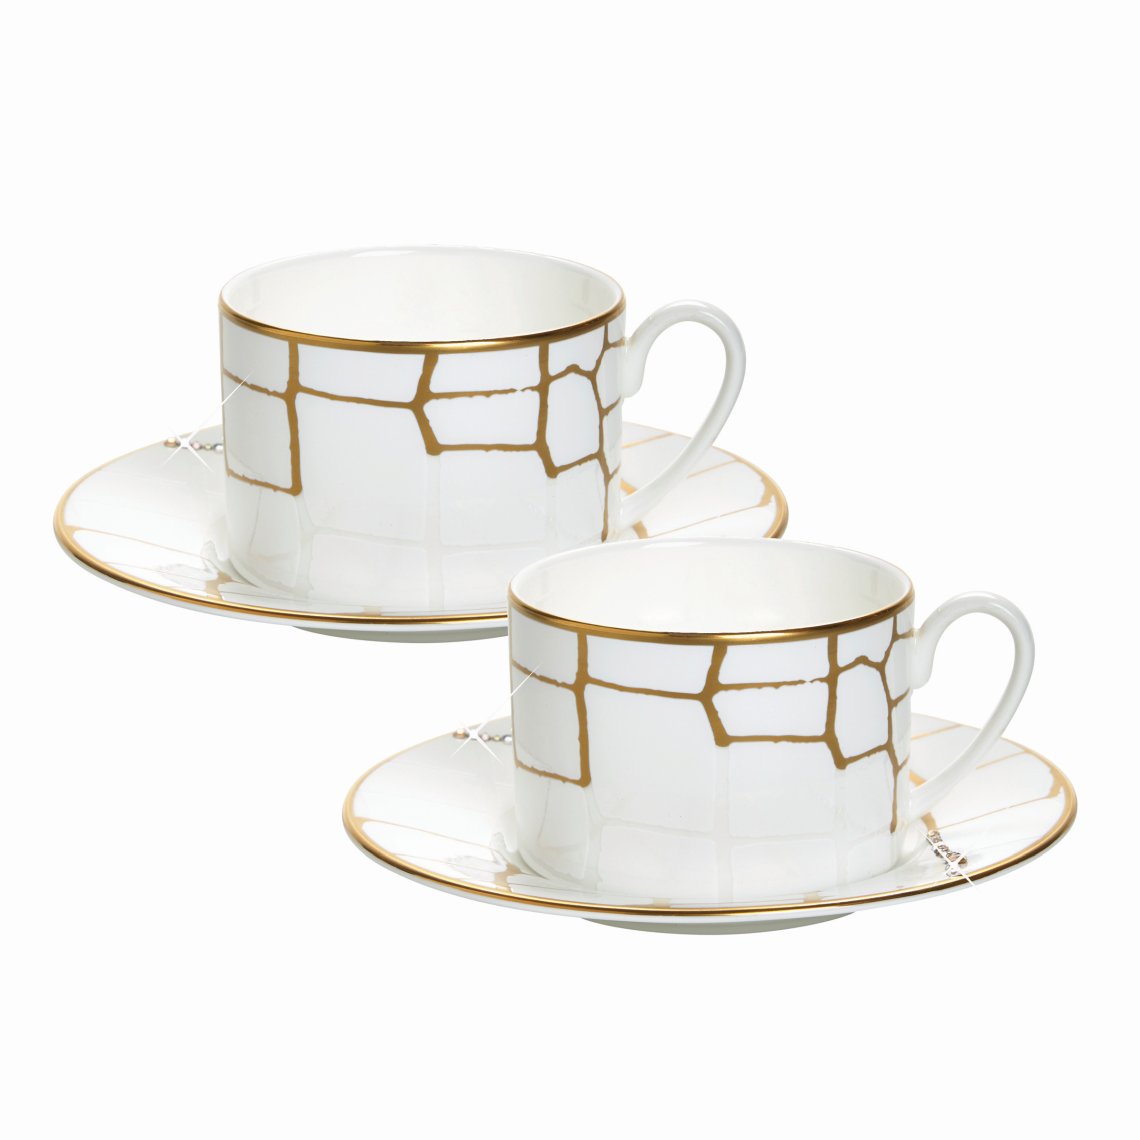 Prouna Alligator Gold Cup and saucer with crystal 